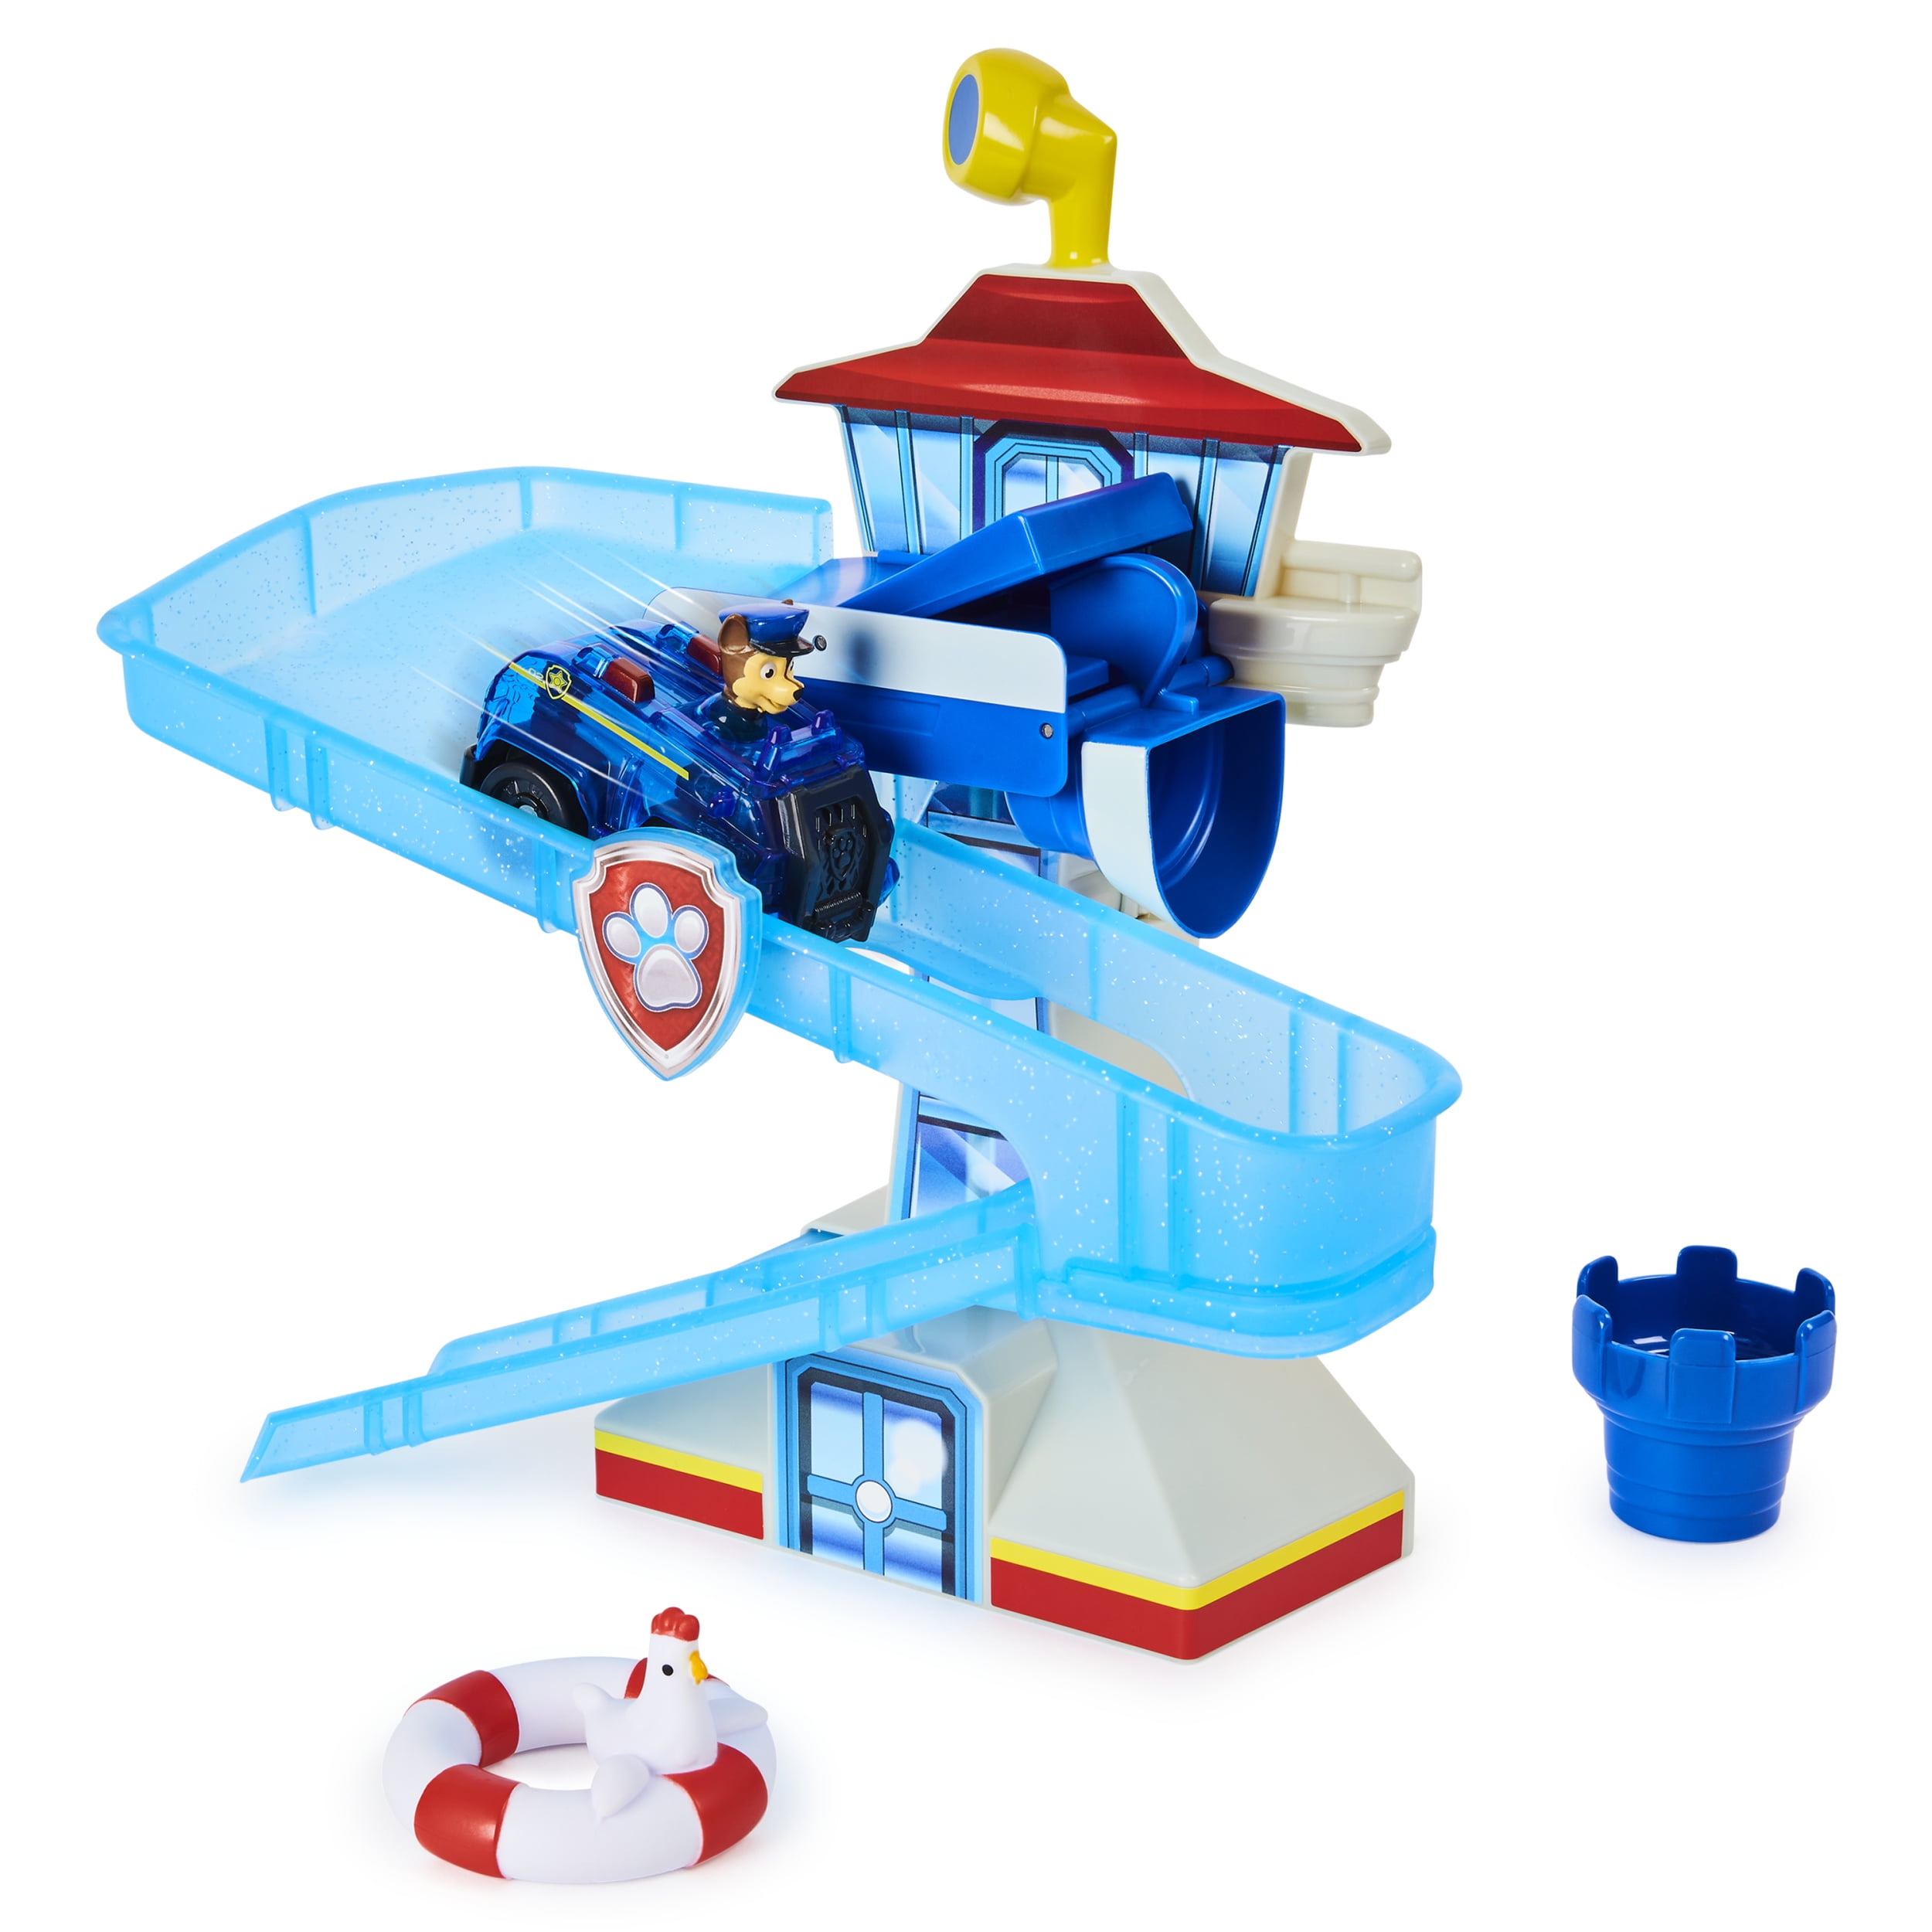 Messy witness Discover PAW Patrol, Adventure Bay Bath Playset with Light-up Chase Vehicle, Bath  Toy for Kids Aged 3 and up - Walmart.com